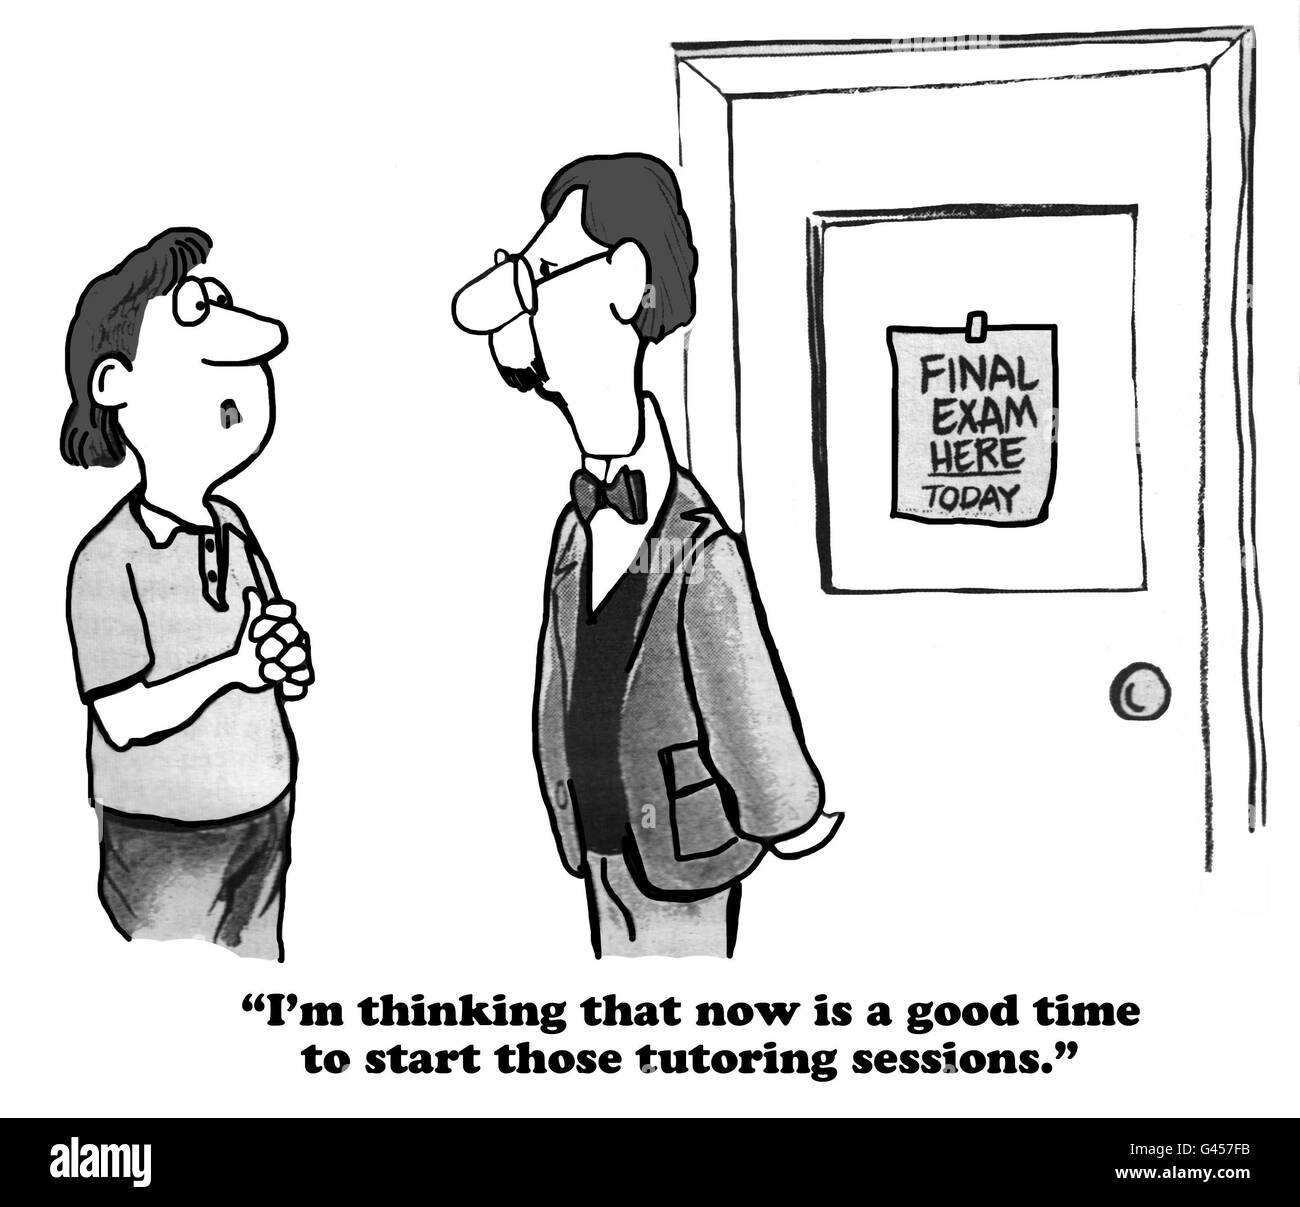 Education cartoon about wanting tutoring the day of the final exam. Stock Photo